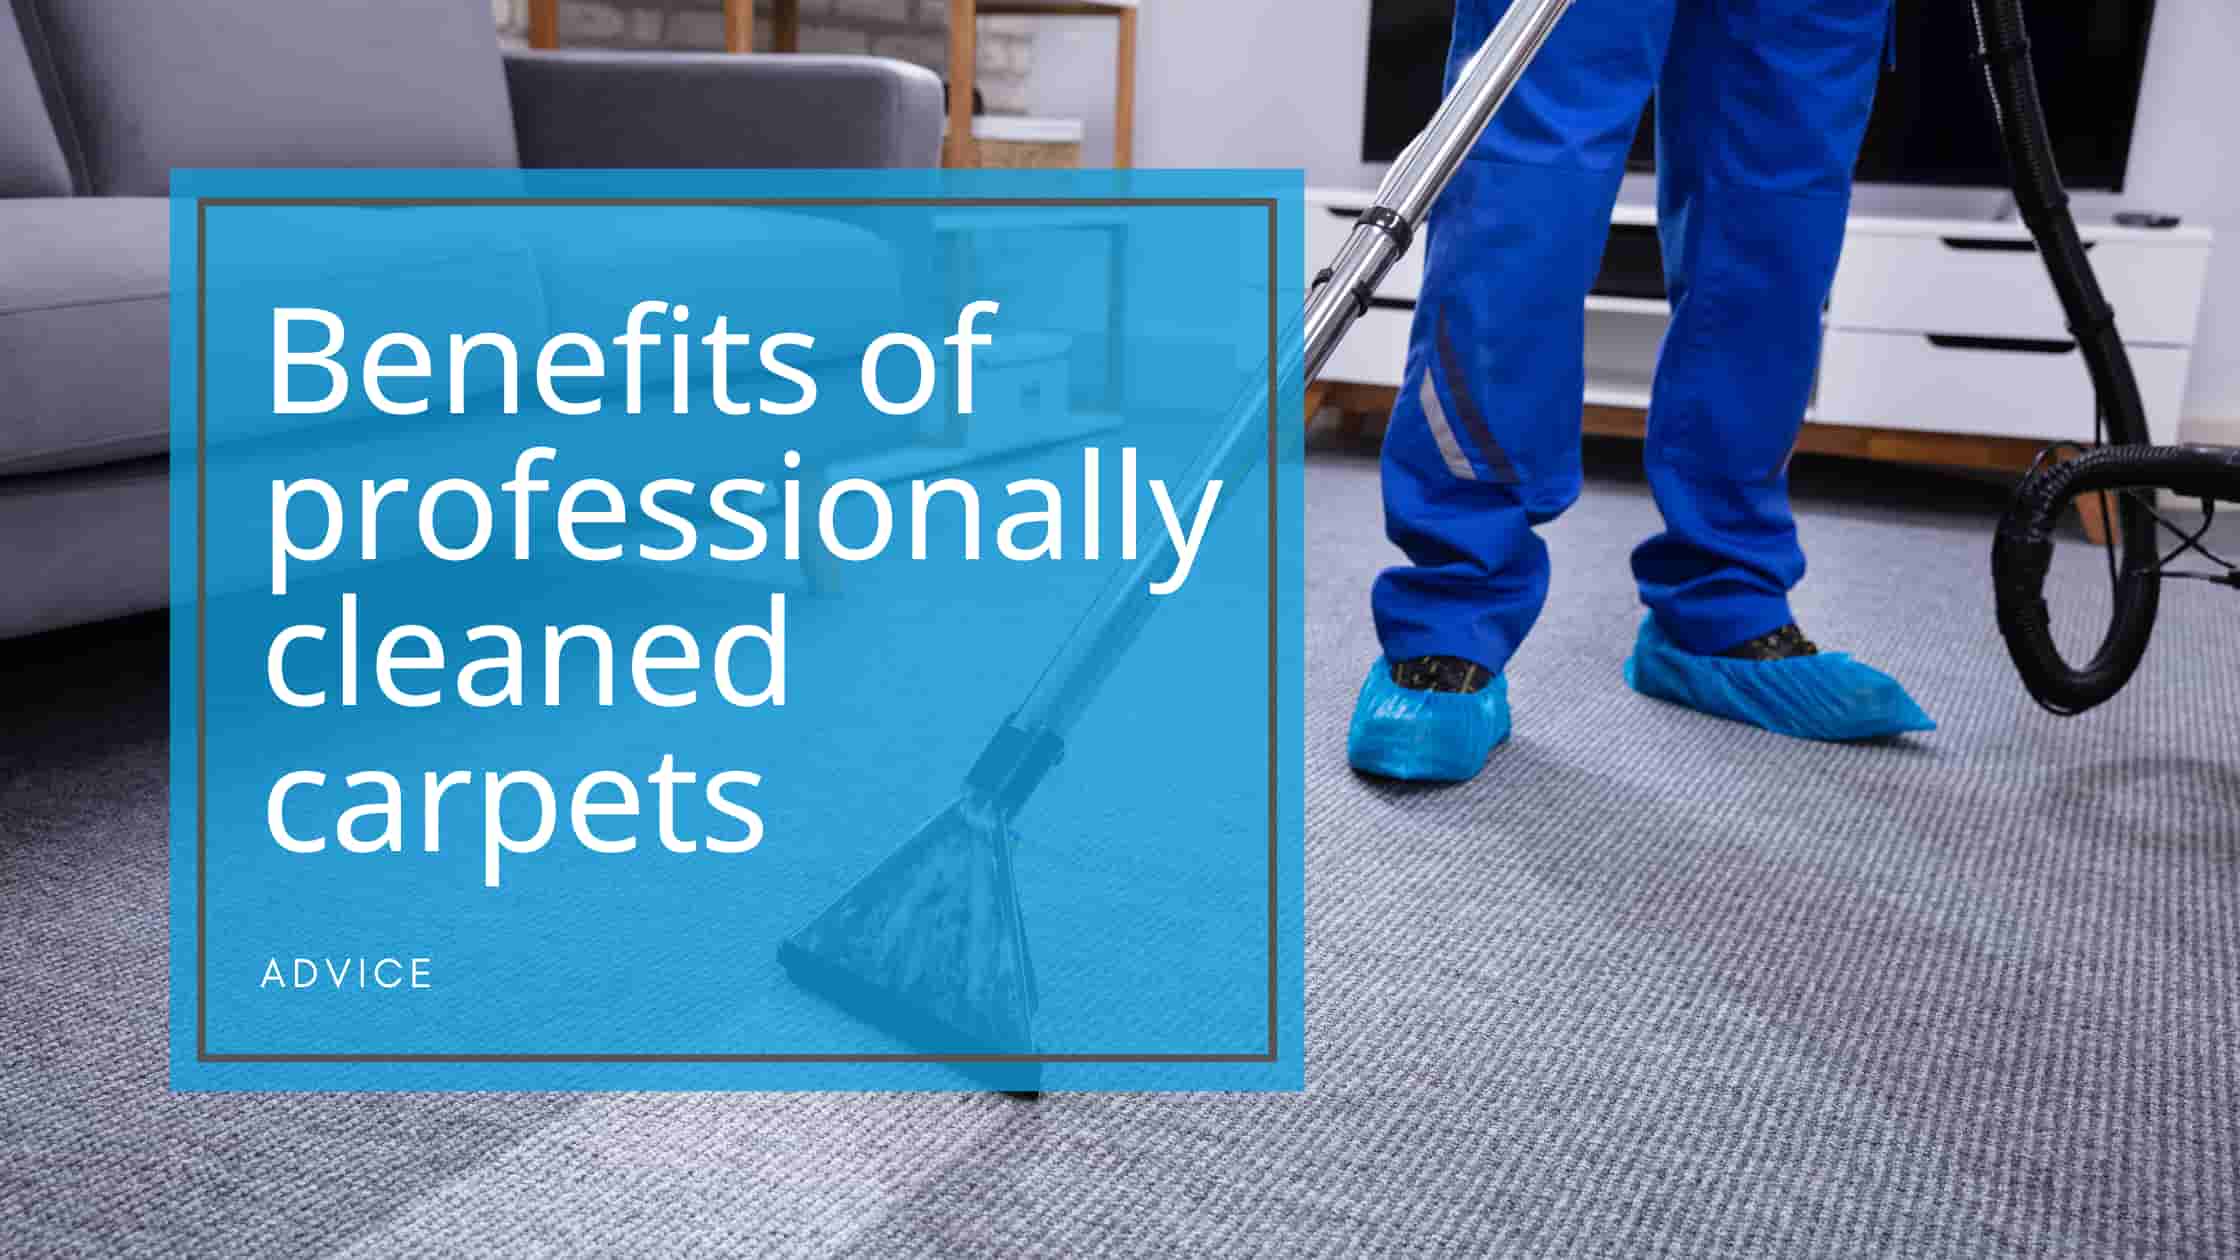 Benefits of a professionally cleaned carpet